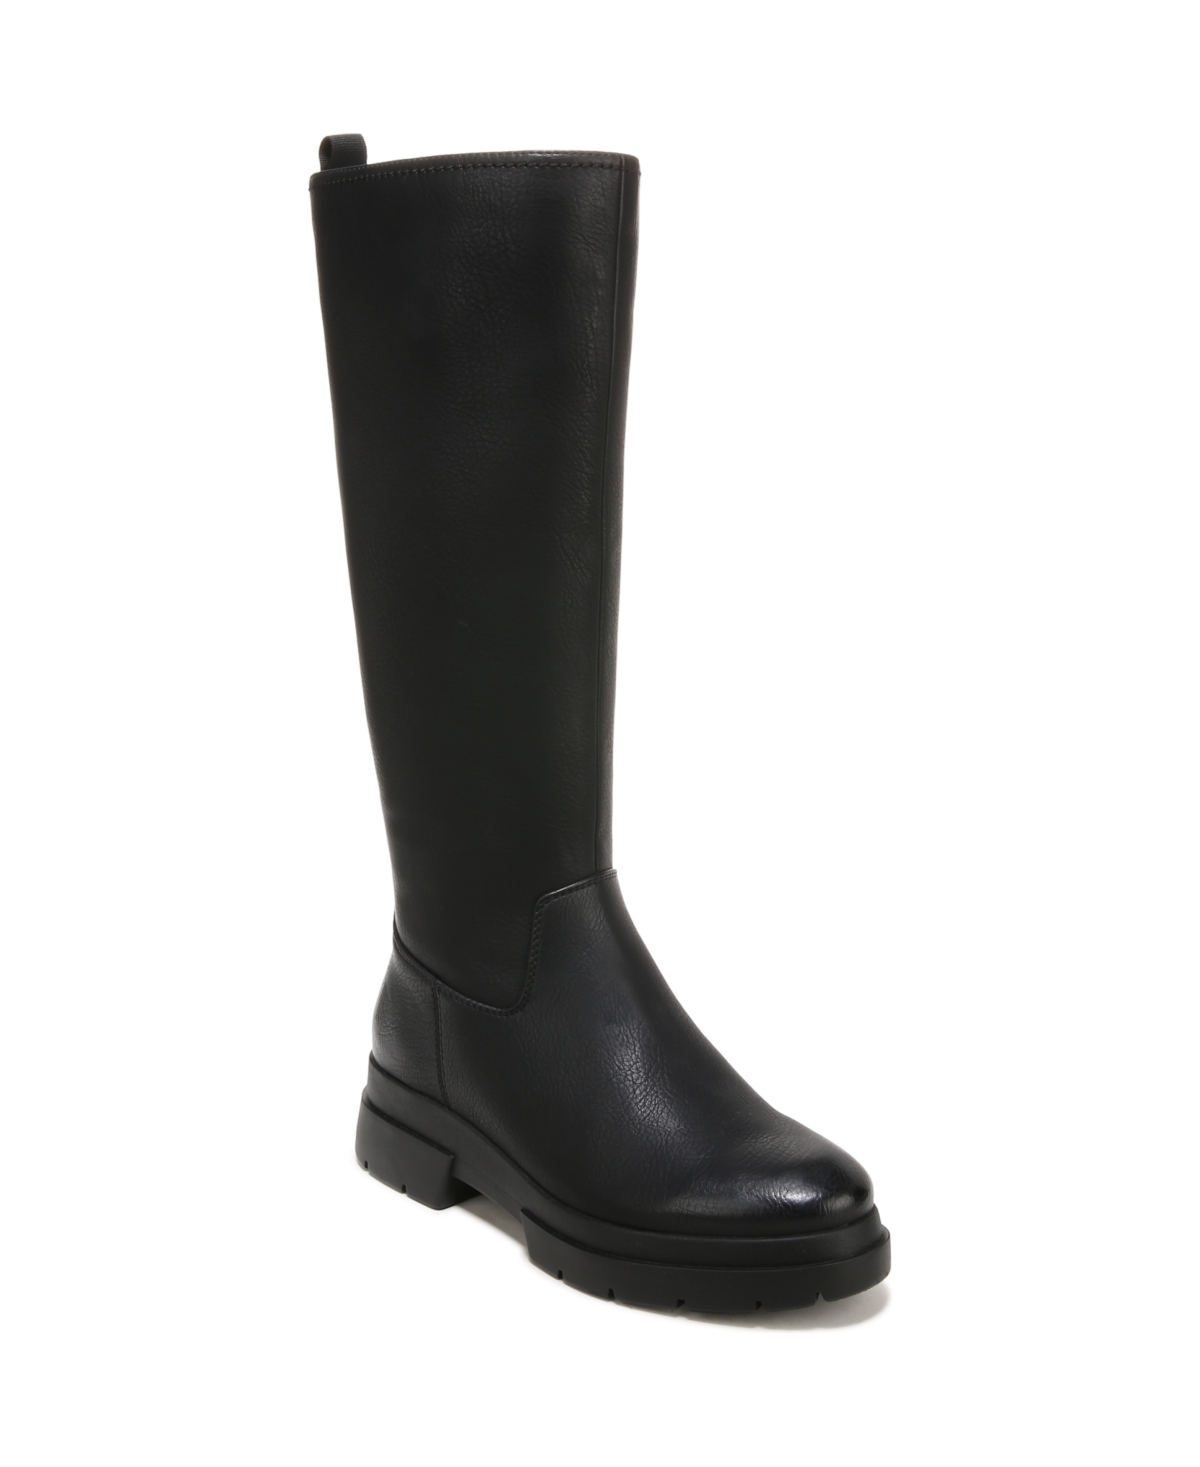 SOUL NATURALIZER ORCHID WIDE CALF HIGH SHAFT BOOTS